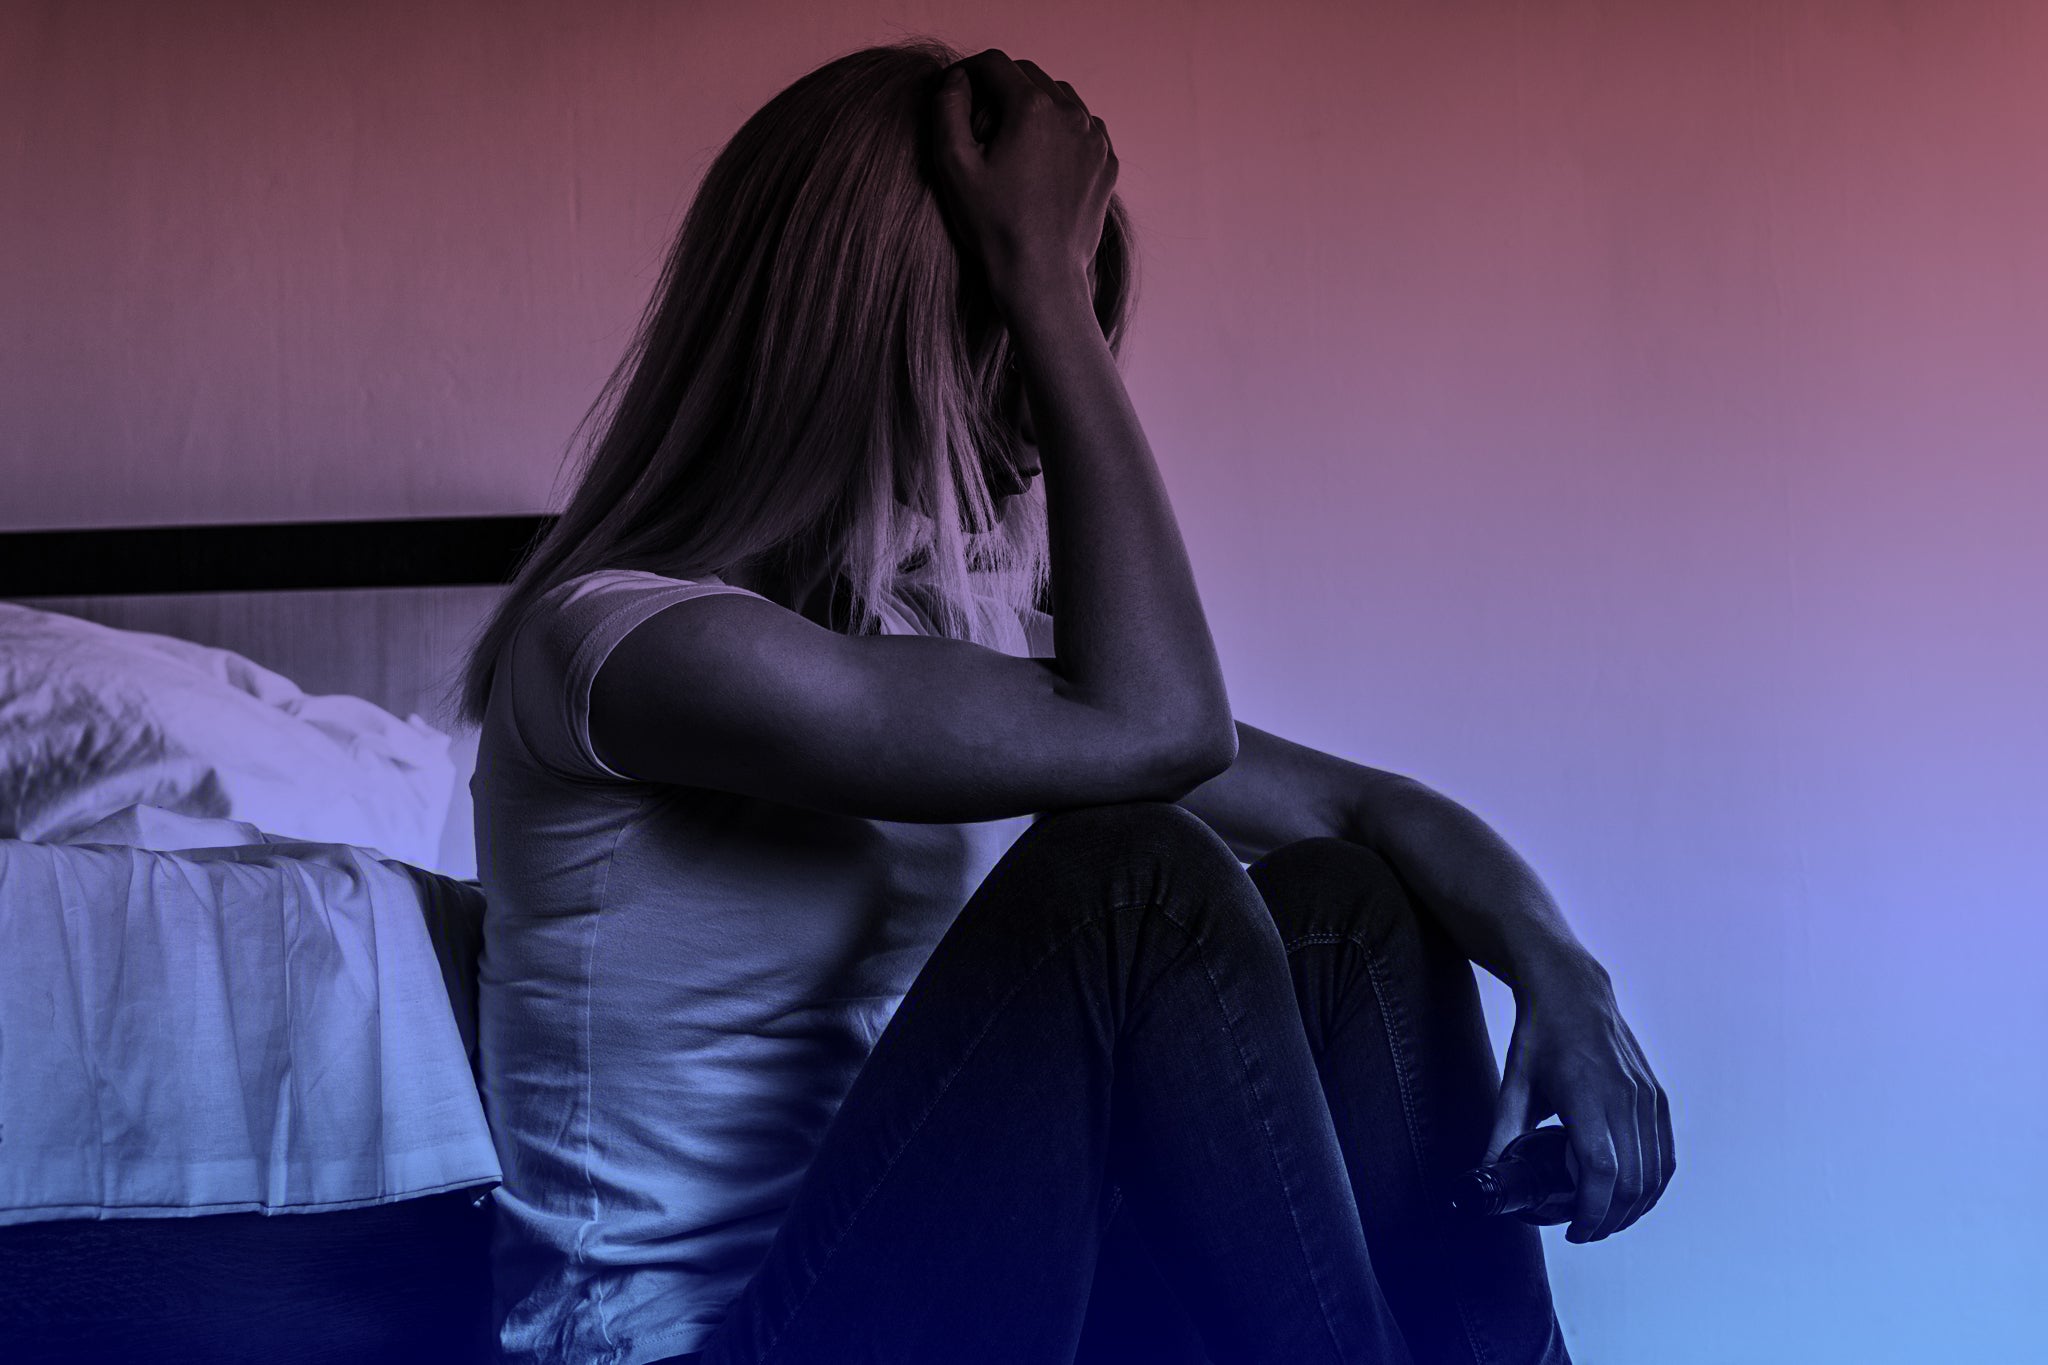 An exposé by The Independent revealed that there had been almost 20,000 allegations of sexual assault and harassment on mental health wards in the past five years